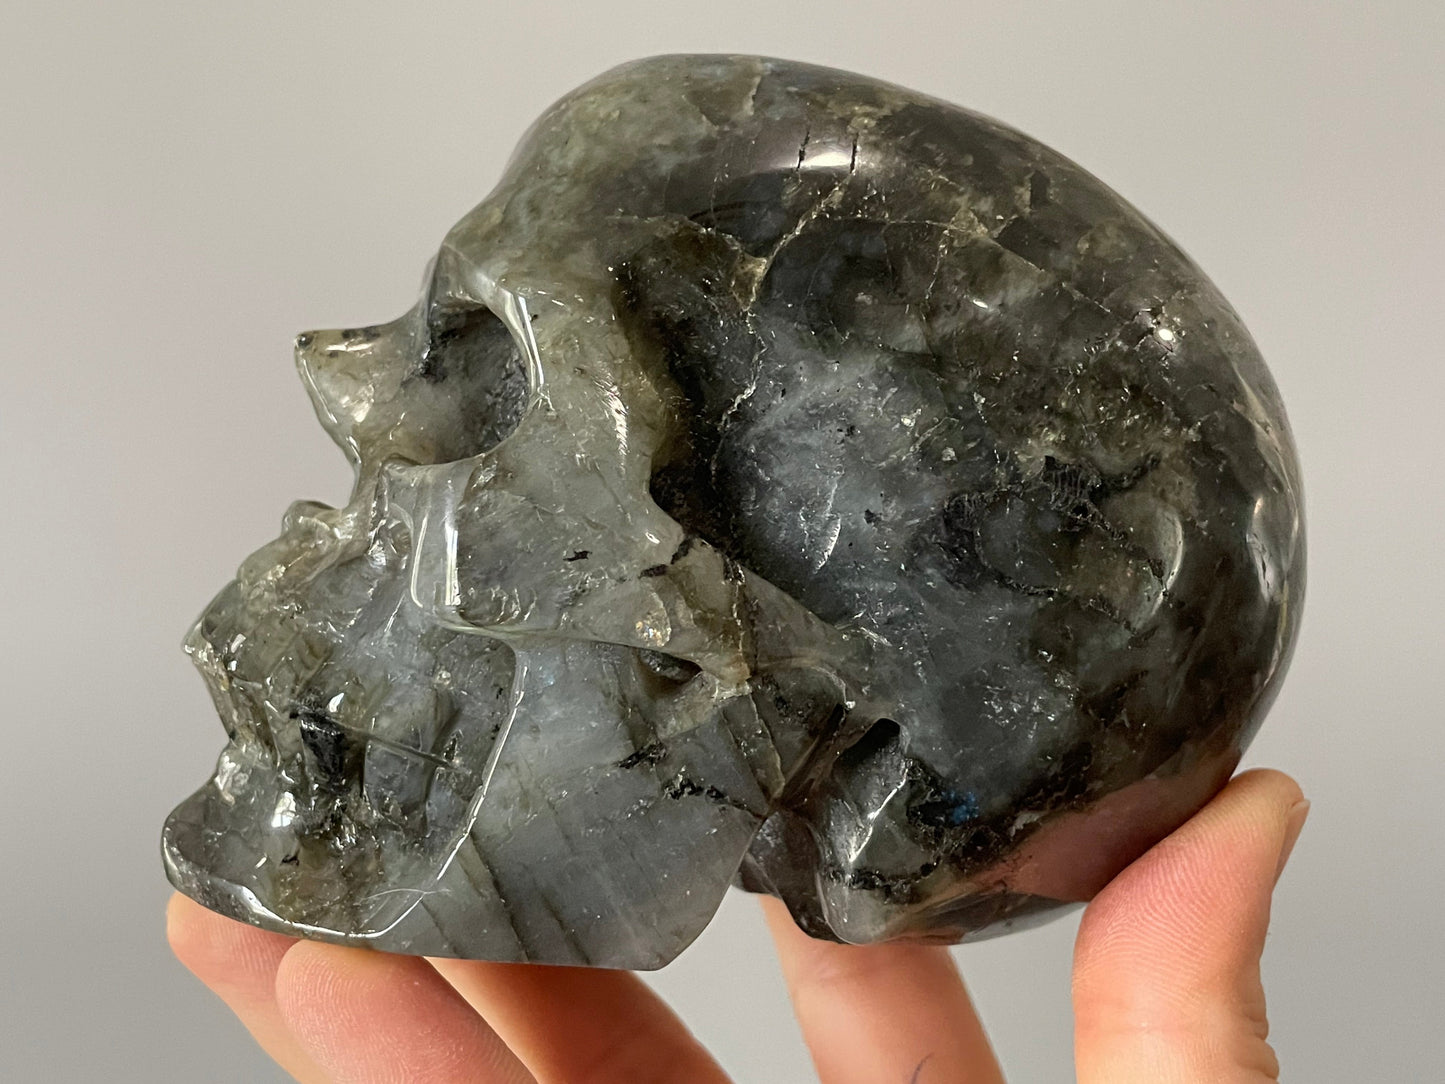 Labradorite Crystal Skull 1.1kg - The Wandering Fox Emporium, Your Metaphysical Store side 2